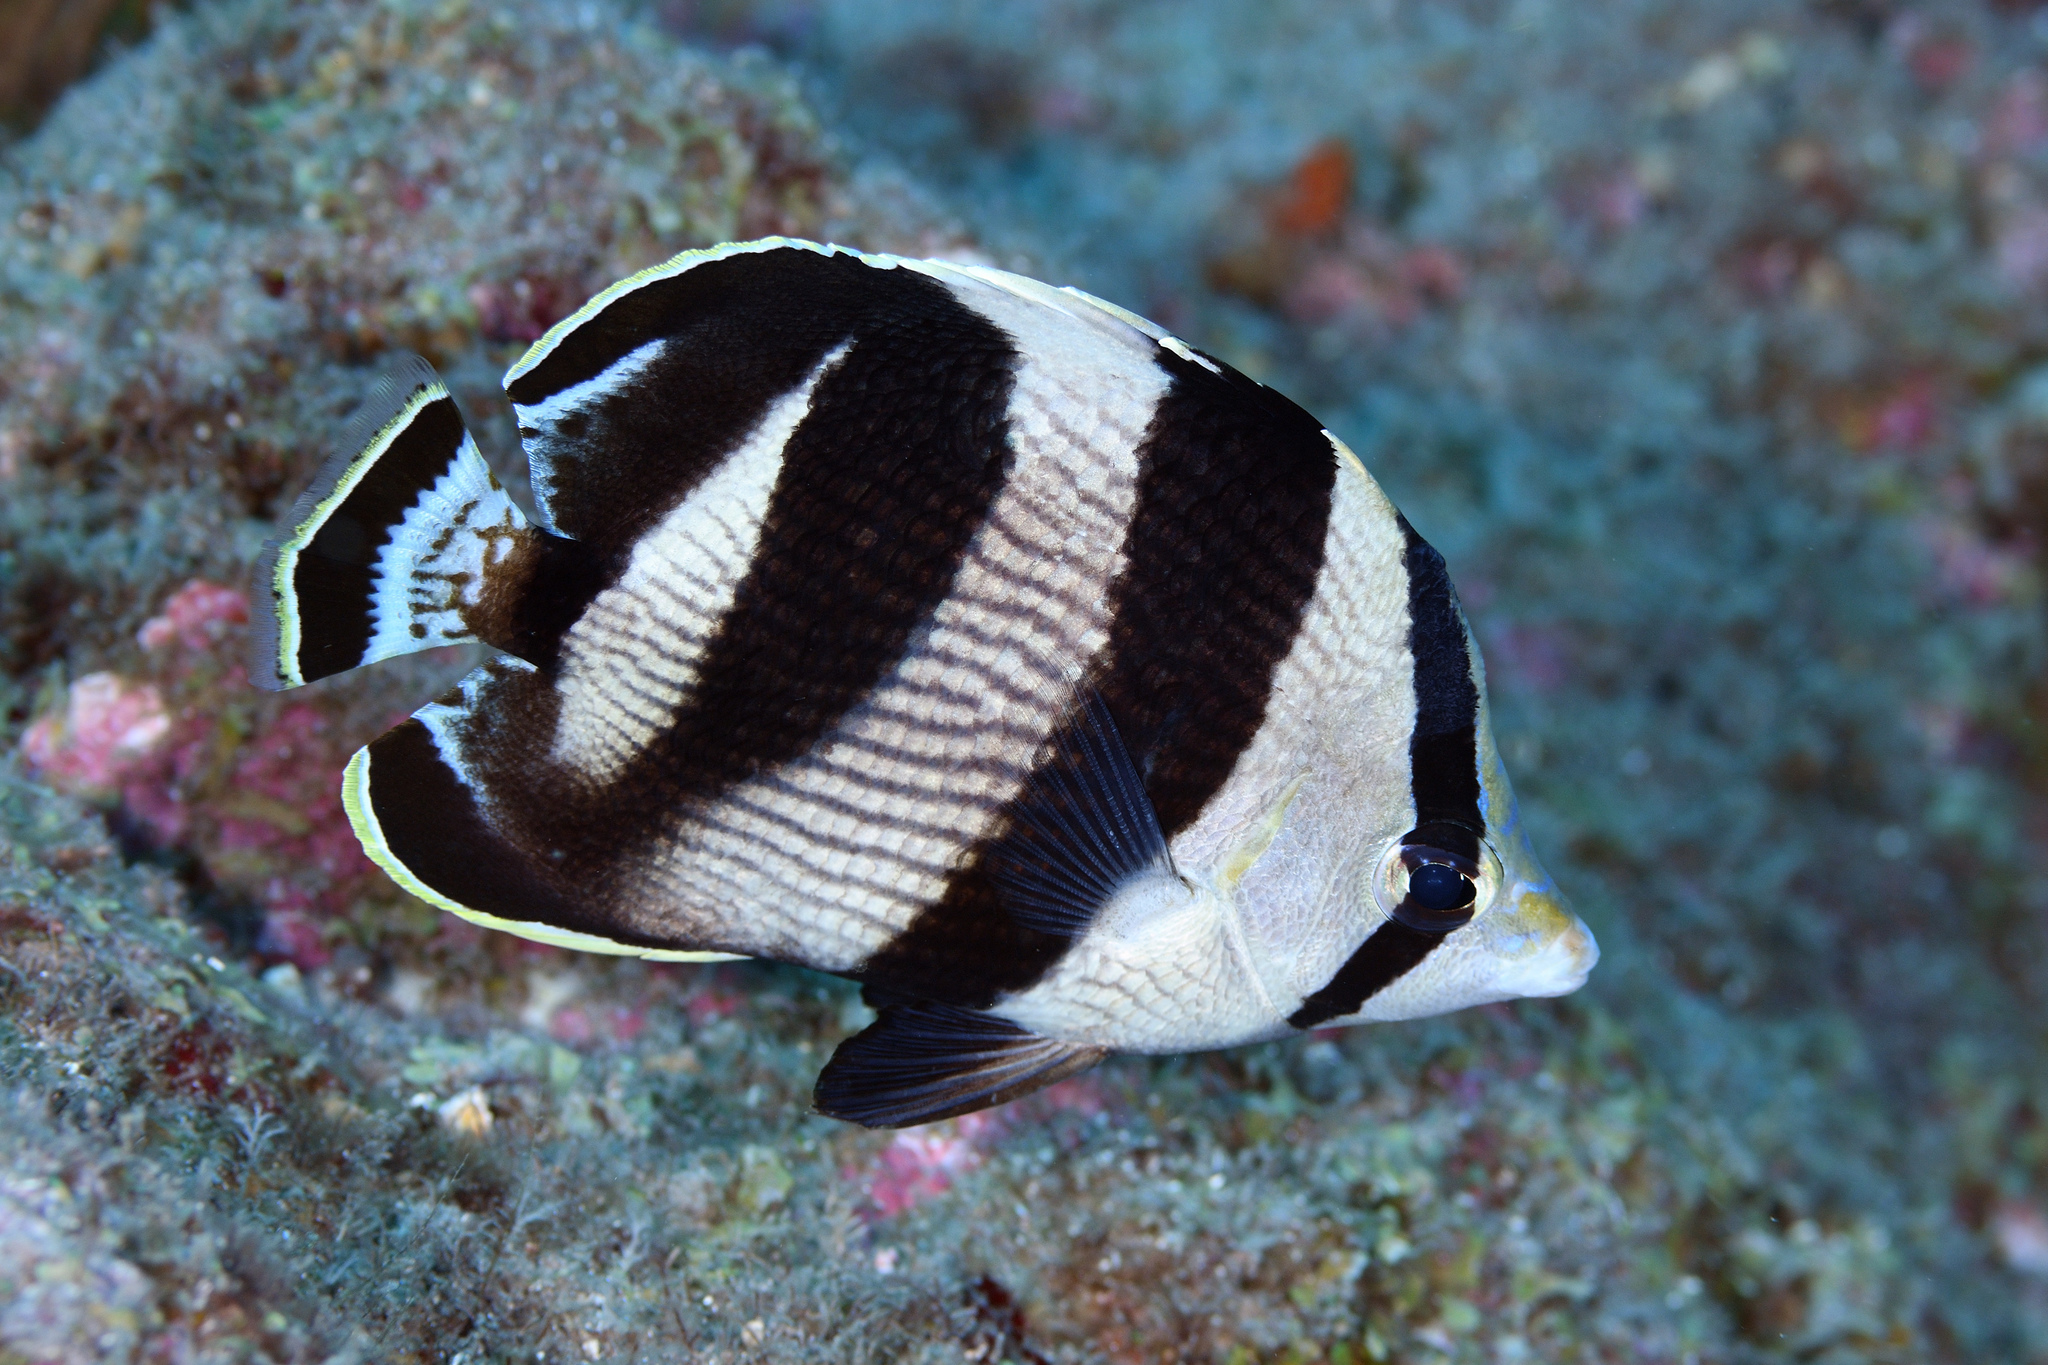 image of Chaetodon striatus (Banded butterflyfish)